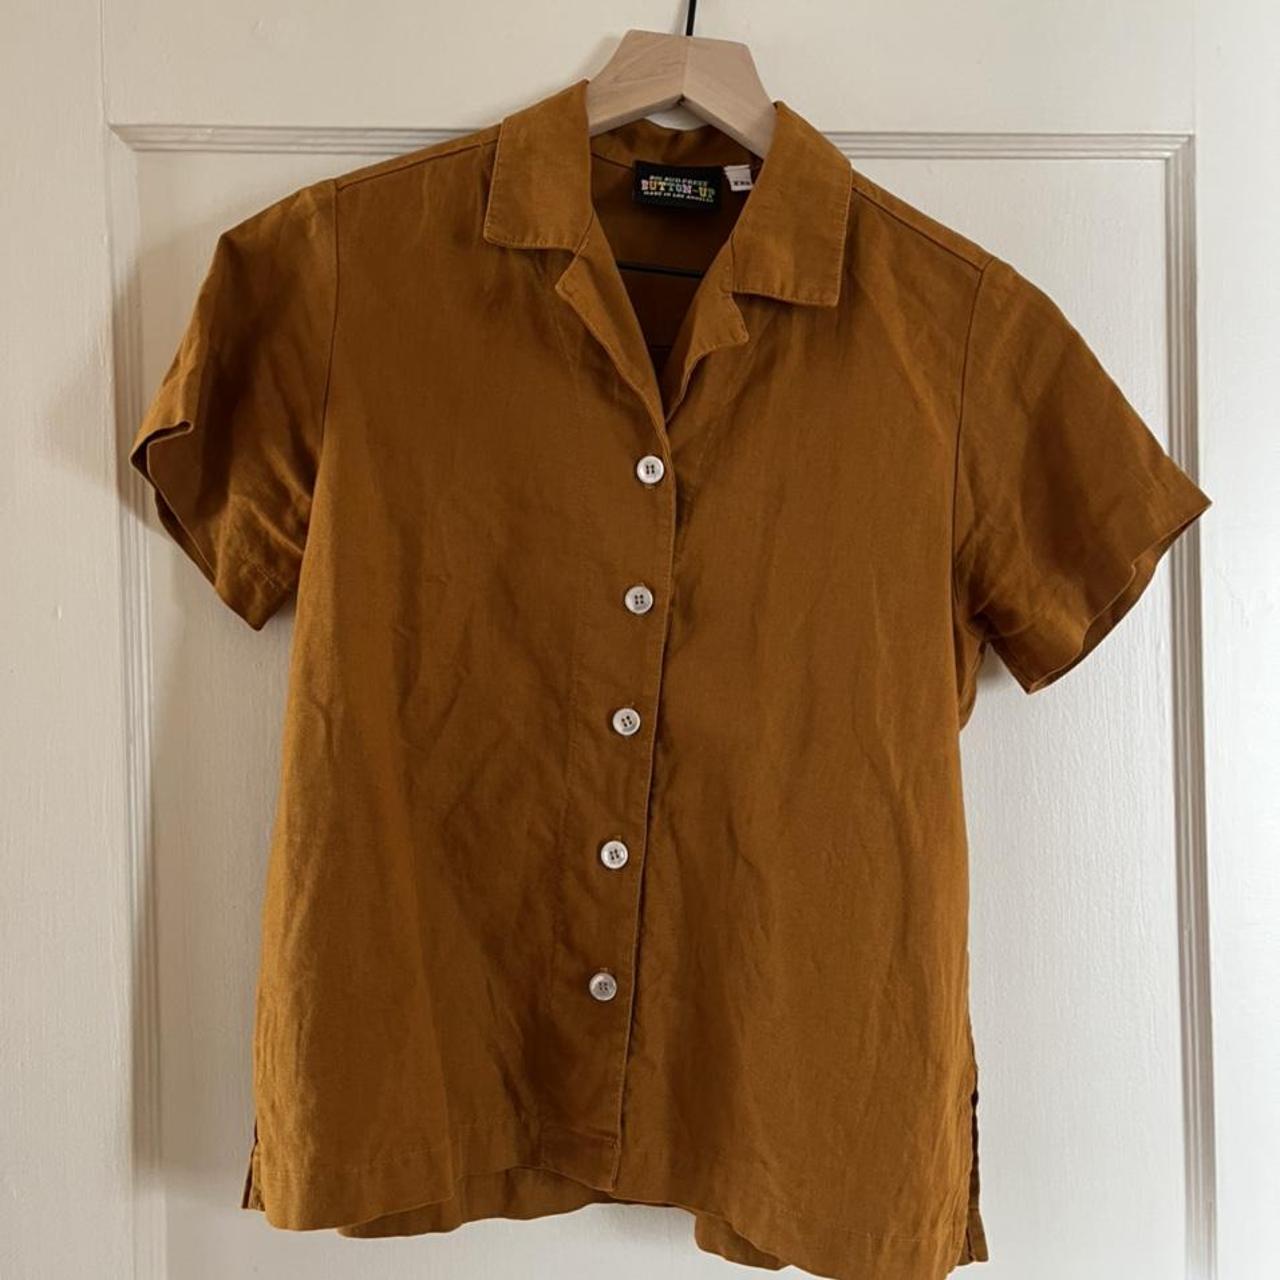 Big Bud Press Pantry Button Up in Spicy Mustard,... - Depop